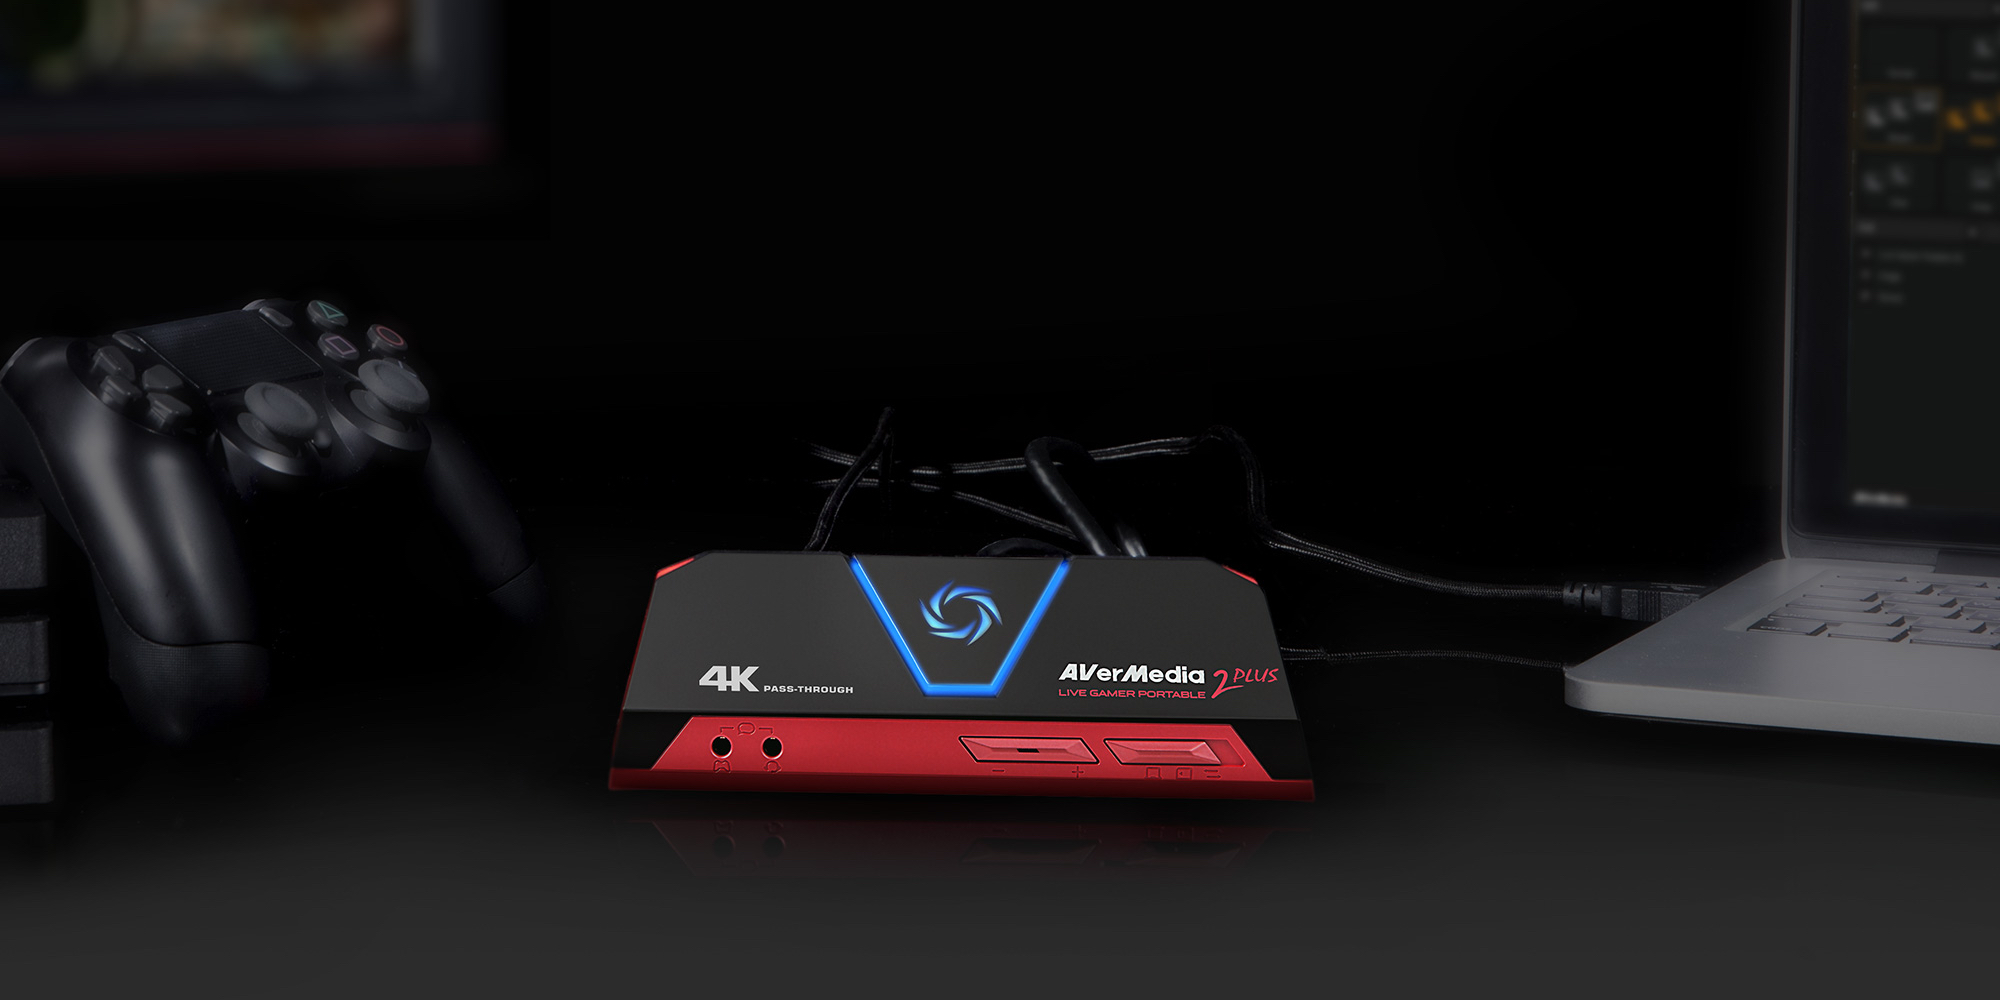 AVerMedia's Live Gamer portable 2 Plus capture system has onboard